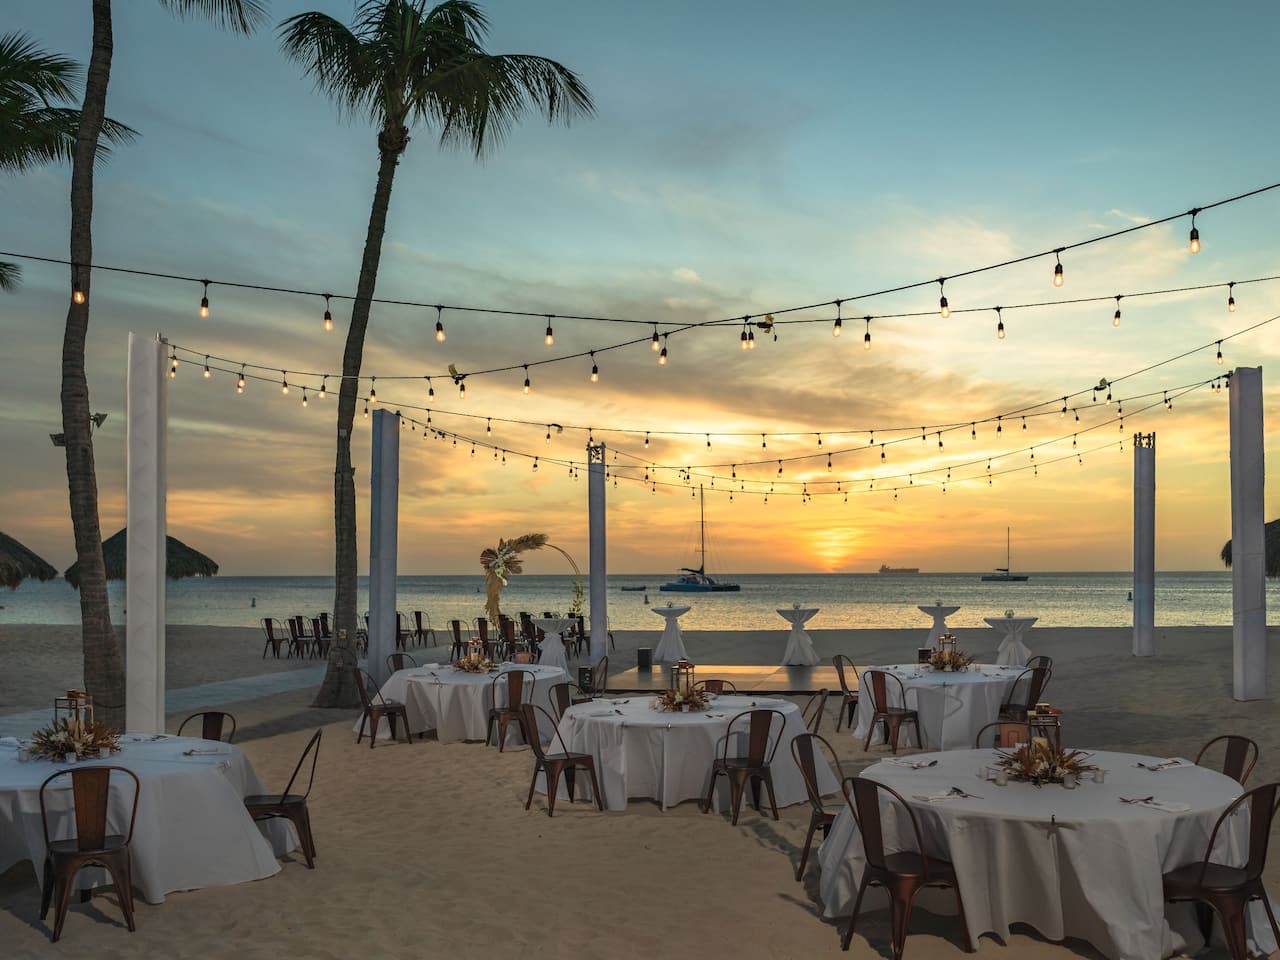 Outdoor dining area on the beach at sunset